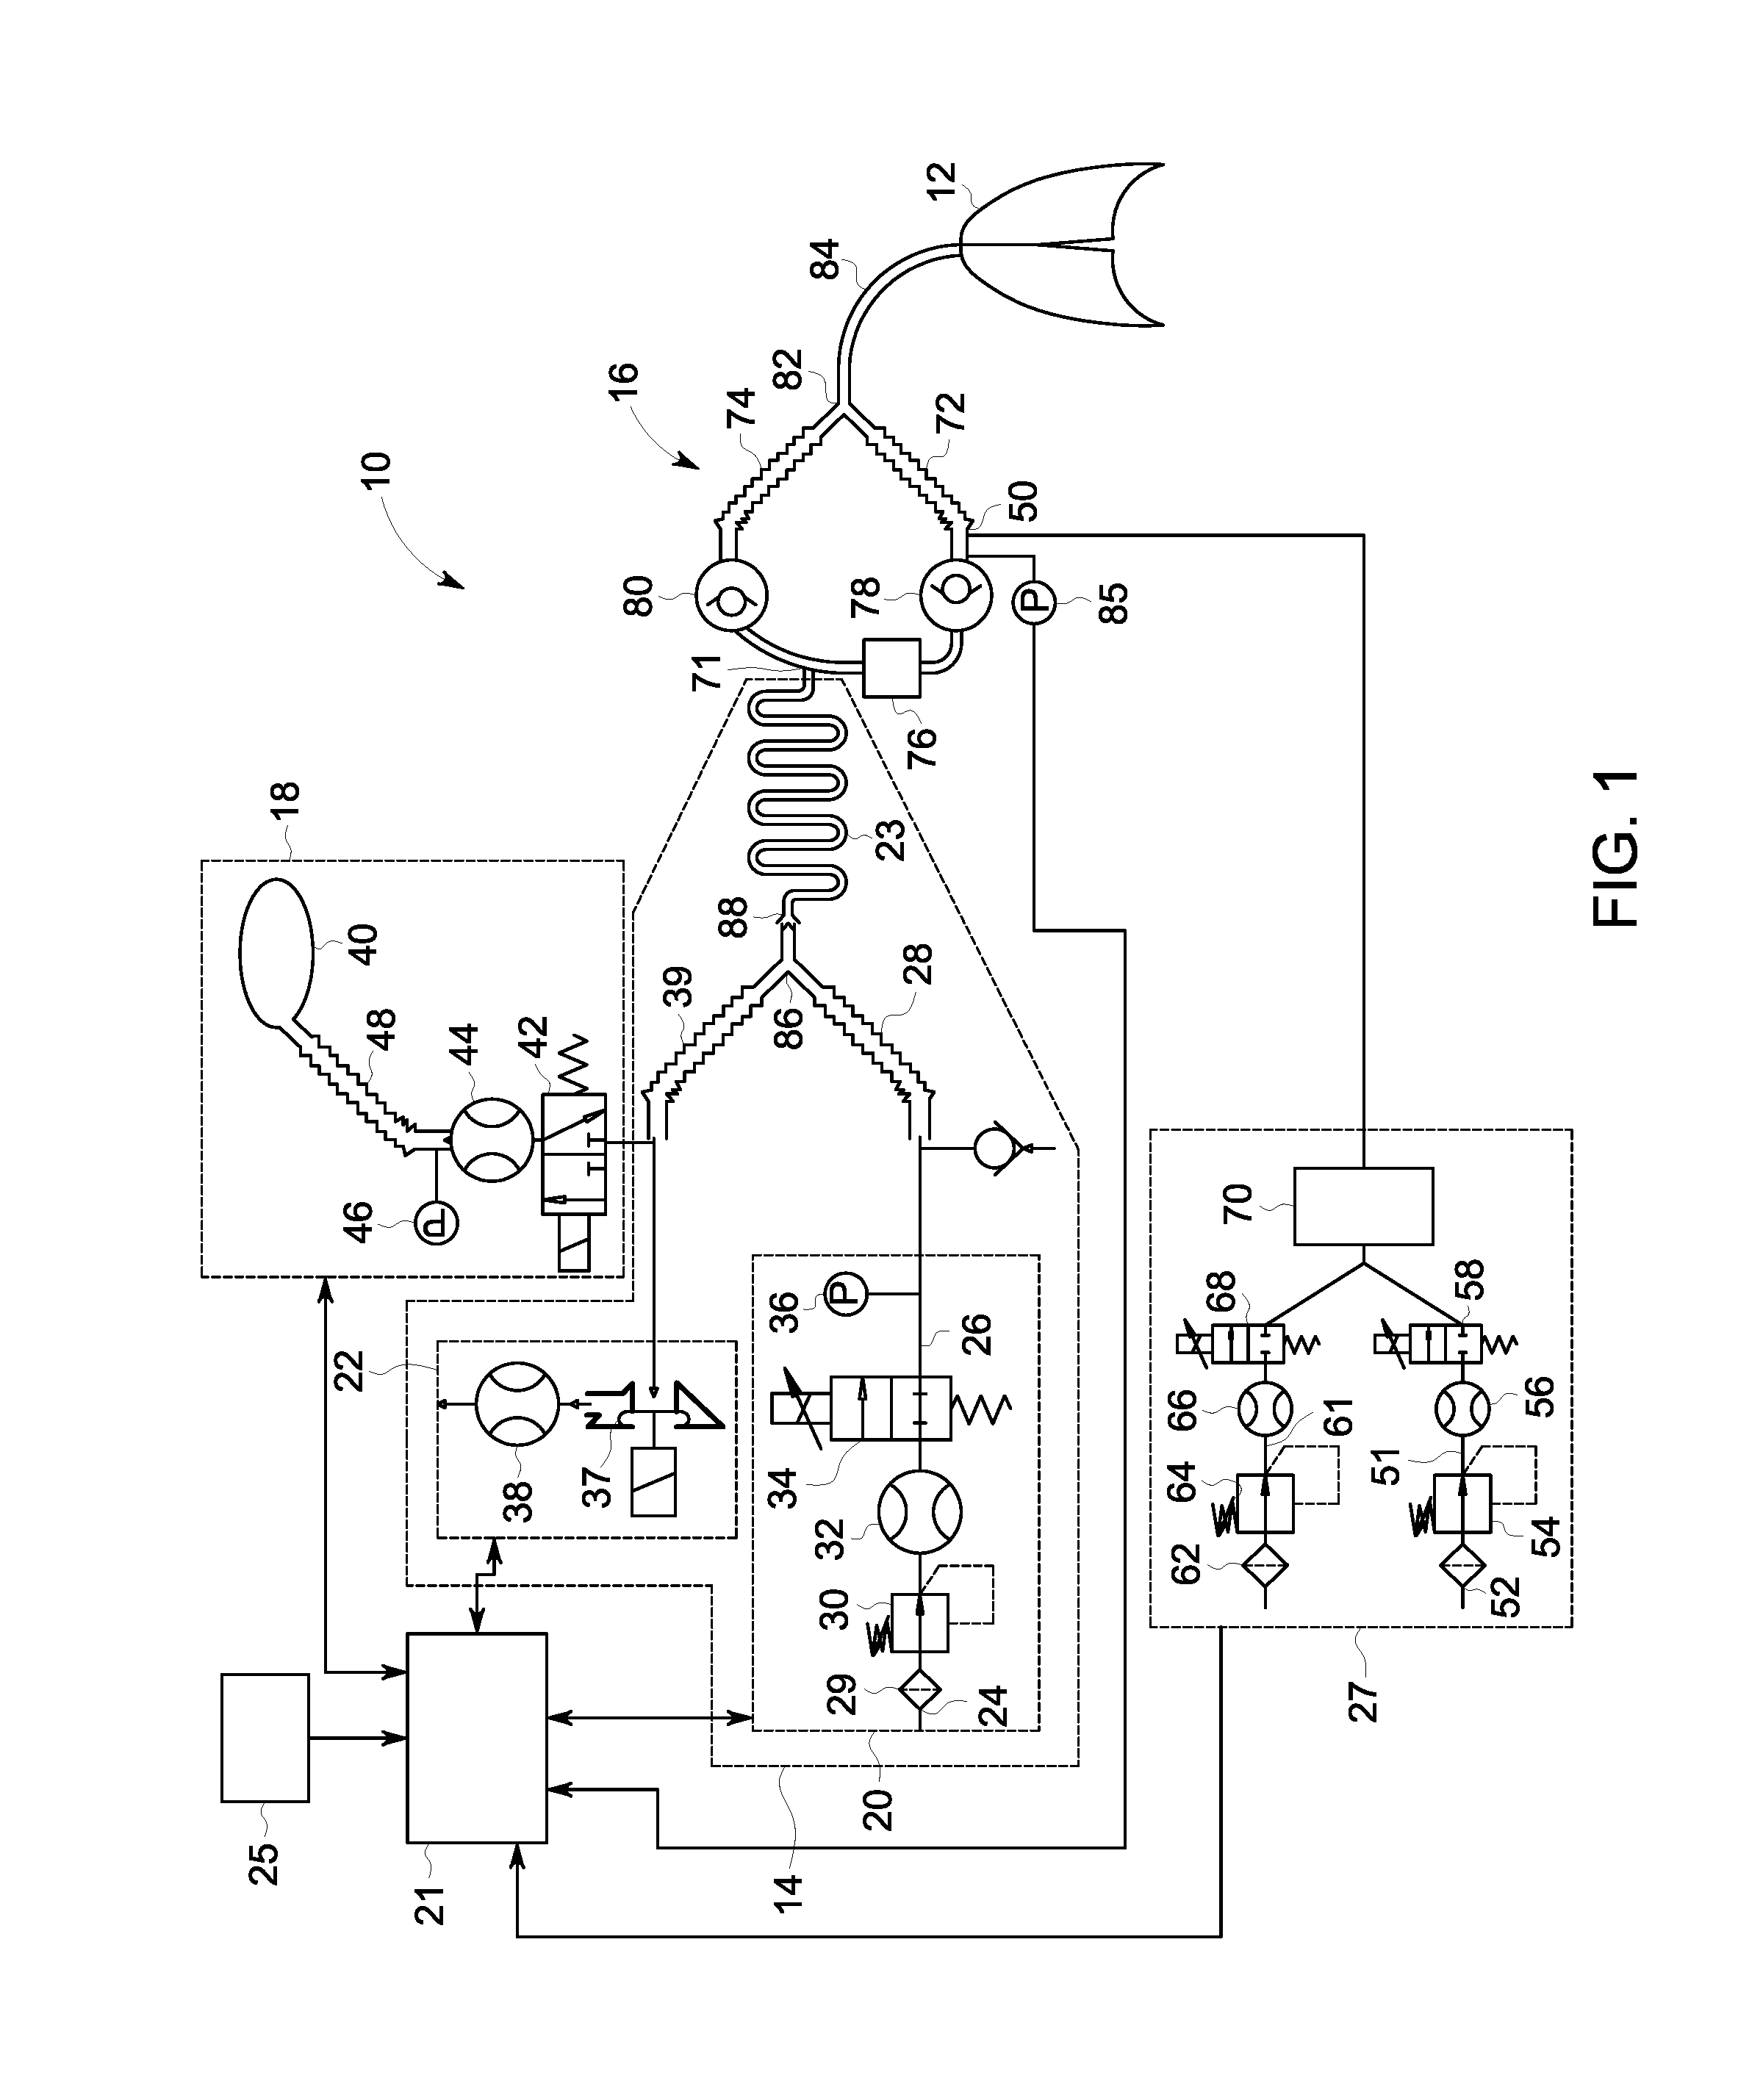 System and method for ventilating lungs